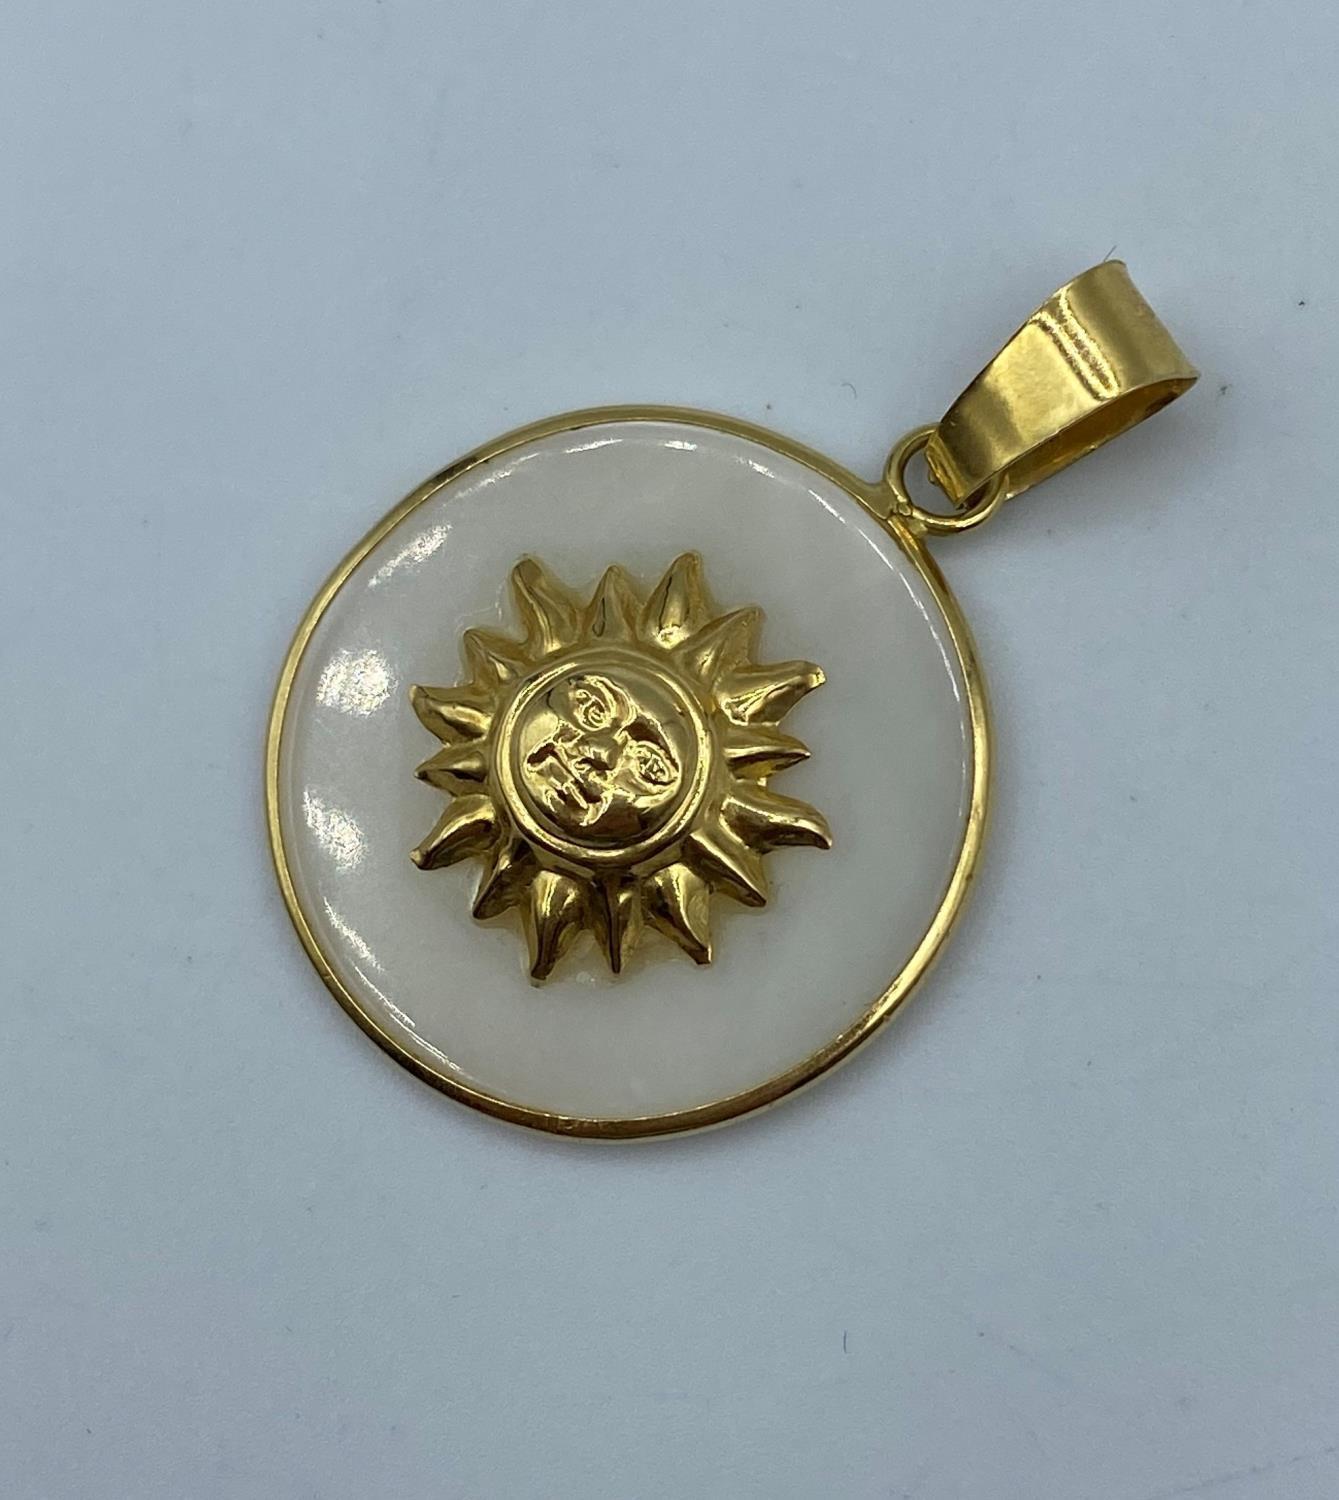 Mother of pearl pendant with sun design set in 18k yellow gold, approx 25mm diameter and weight 3.